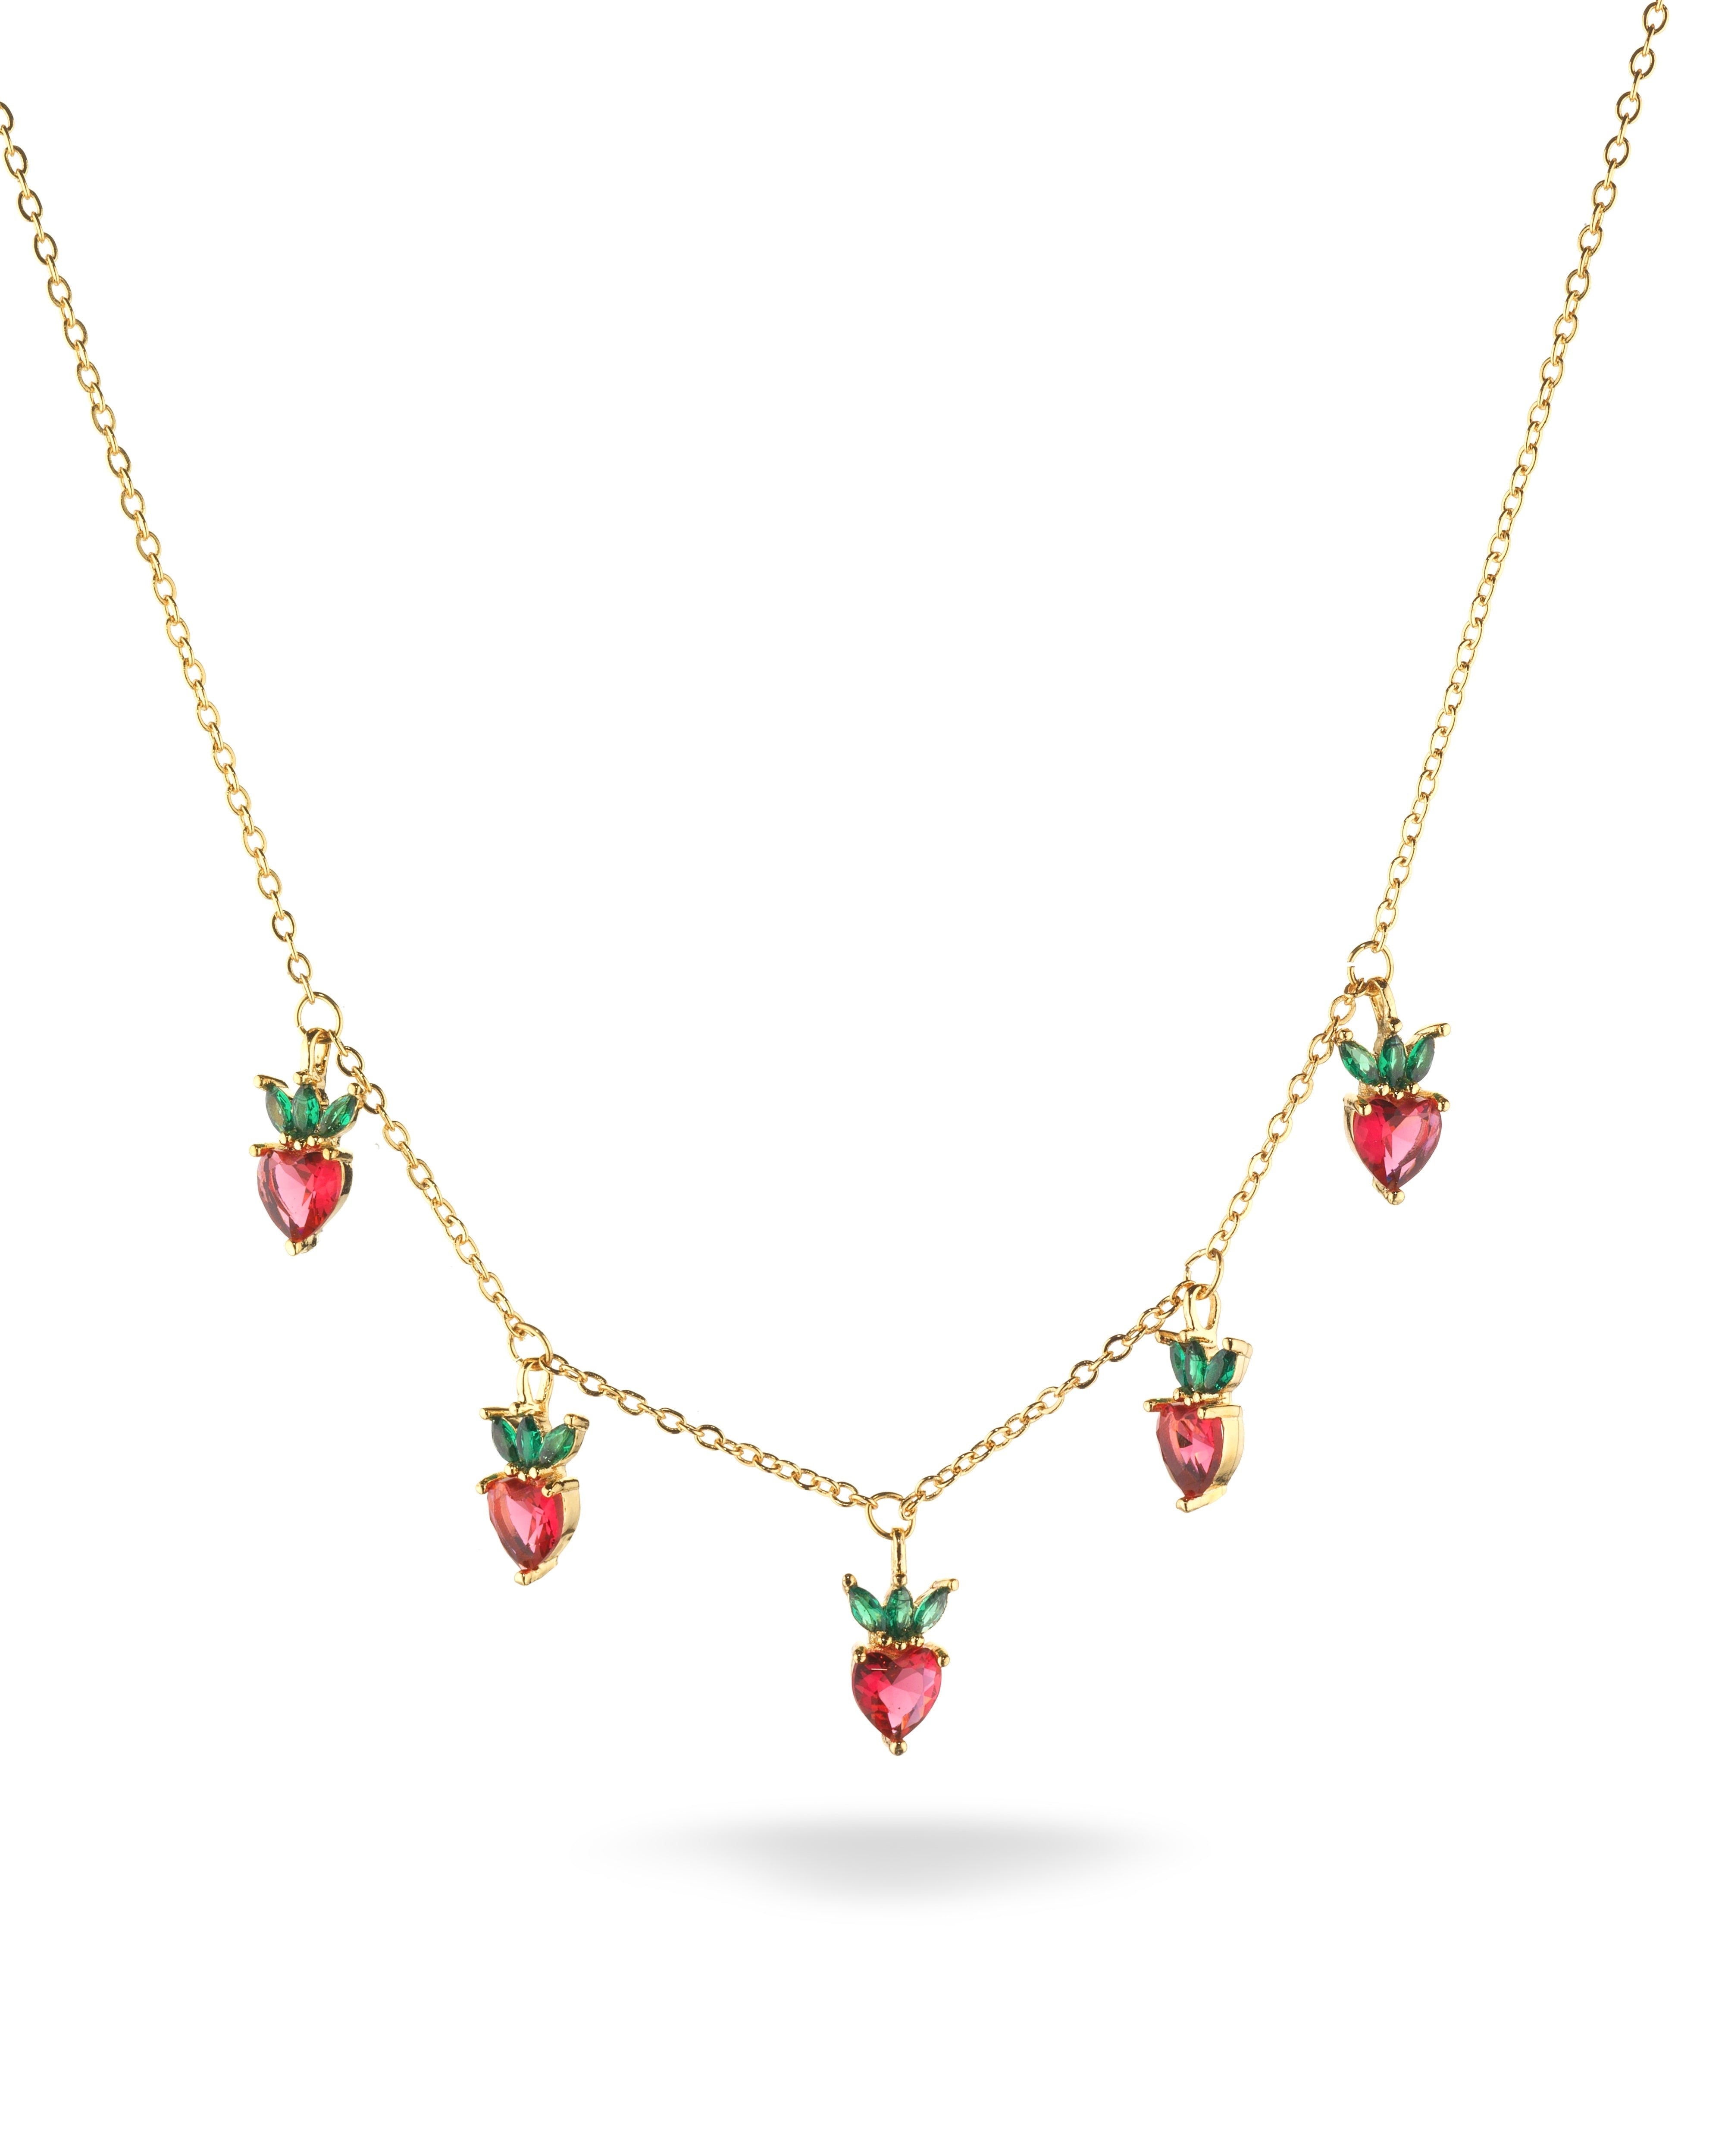 Strawberry charms necklace